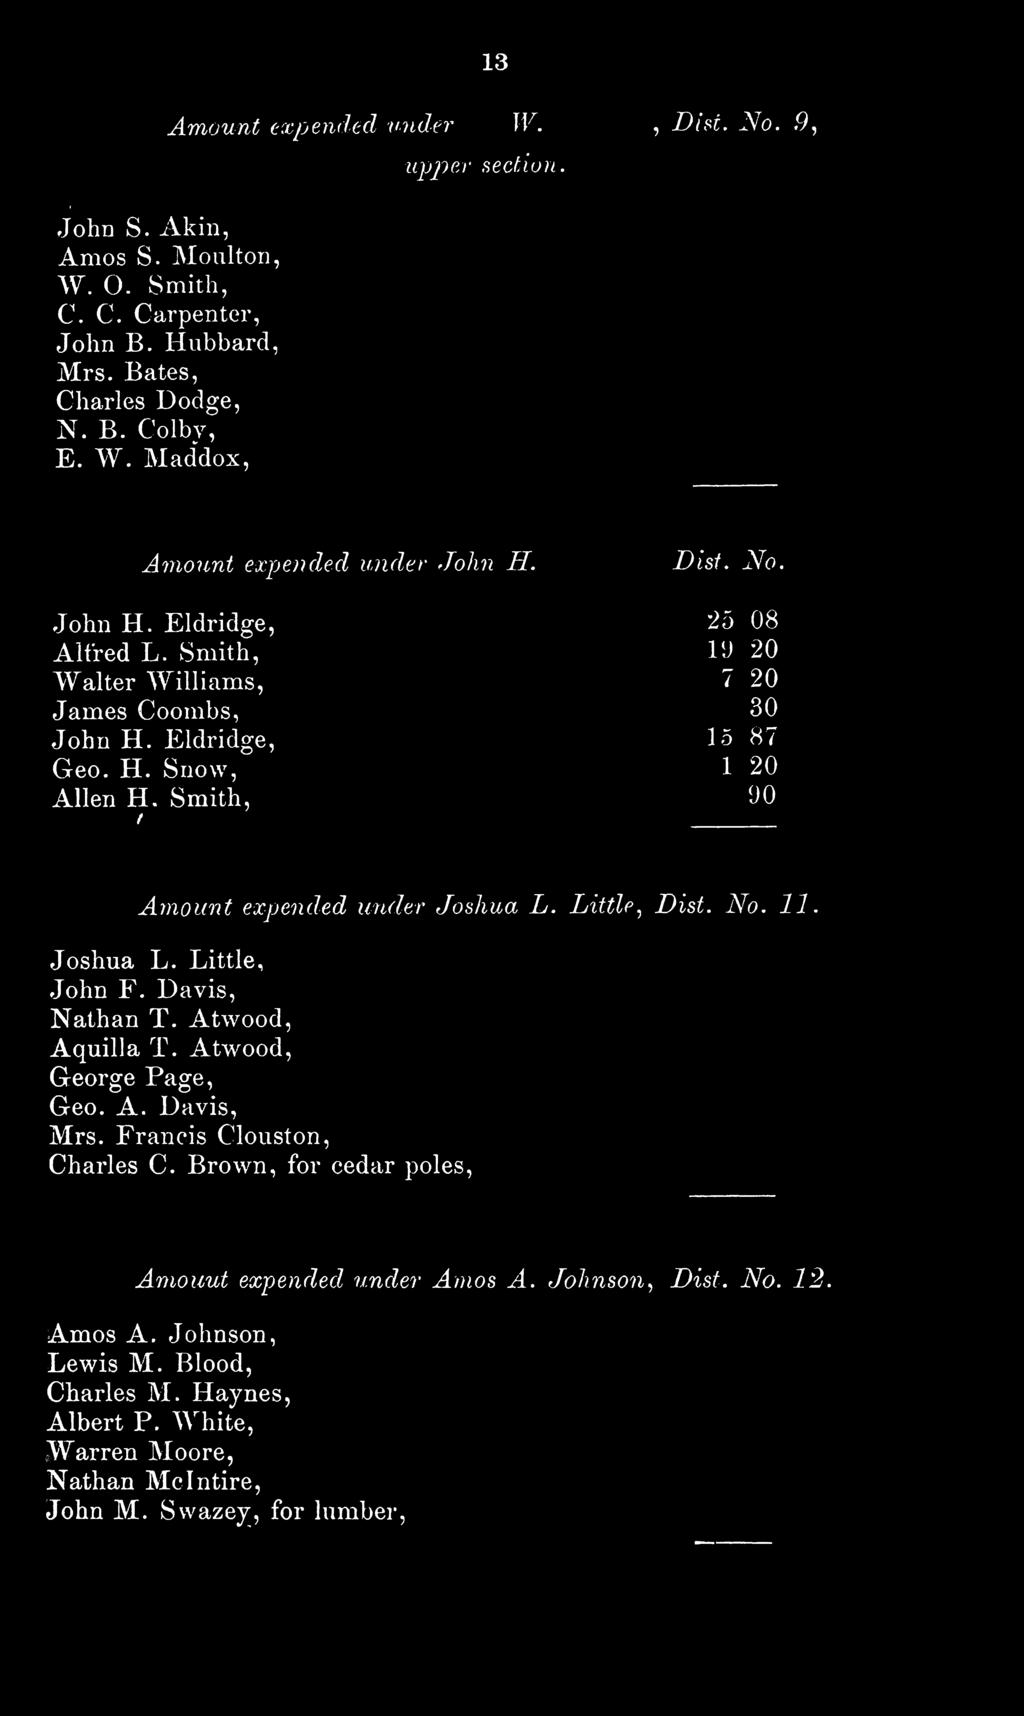 Smith, t 00 Amount expended under Joshua L. Little, Dist. No. 11. Joshua L. Little, John F. Davis, Nathan T. Atwood, Aquilla T. Atwood, George Page, Geo. A. Davis, Mrs.